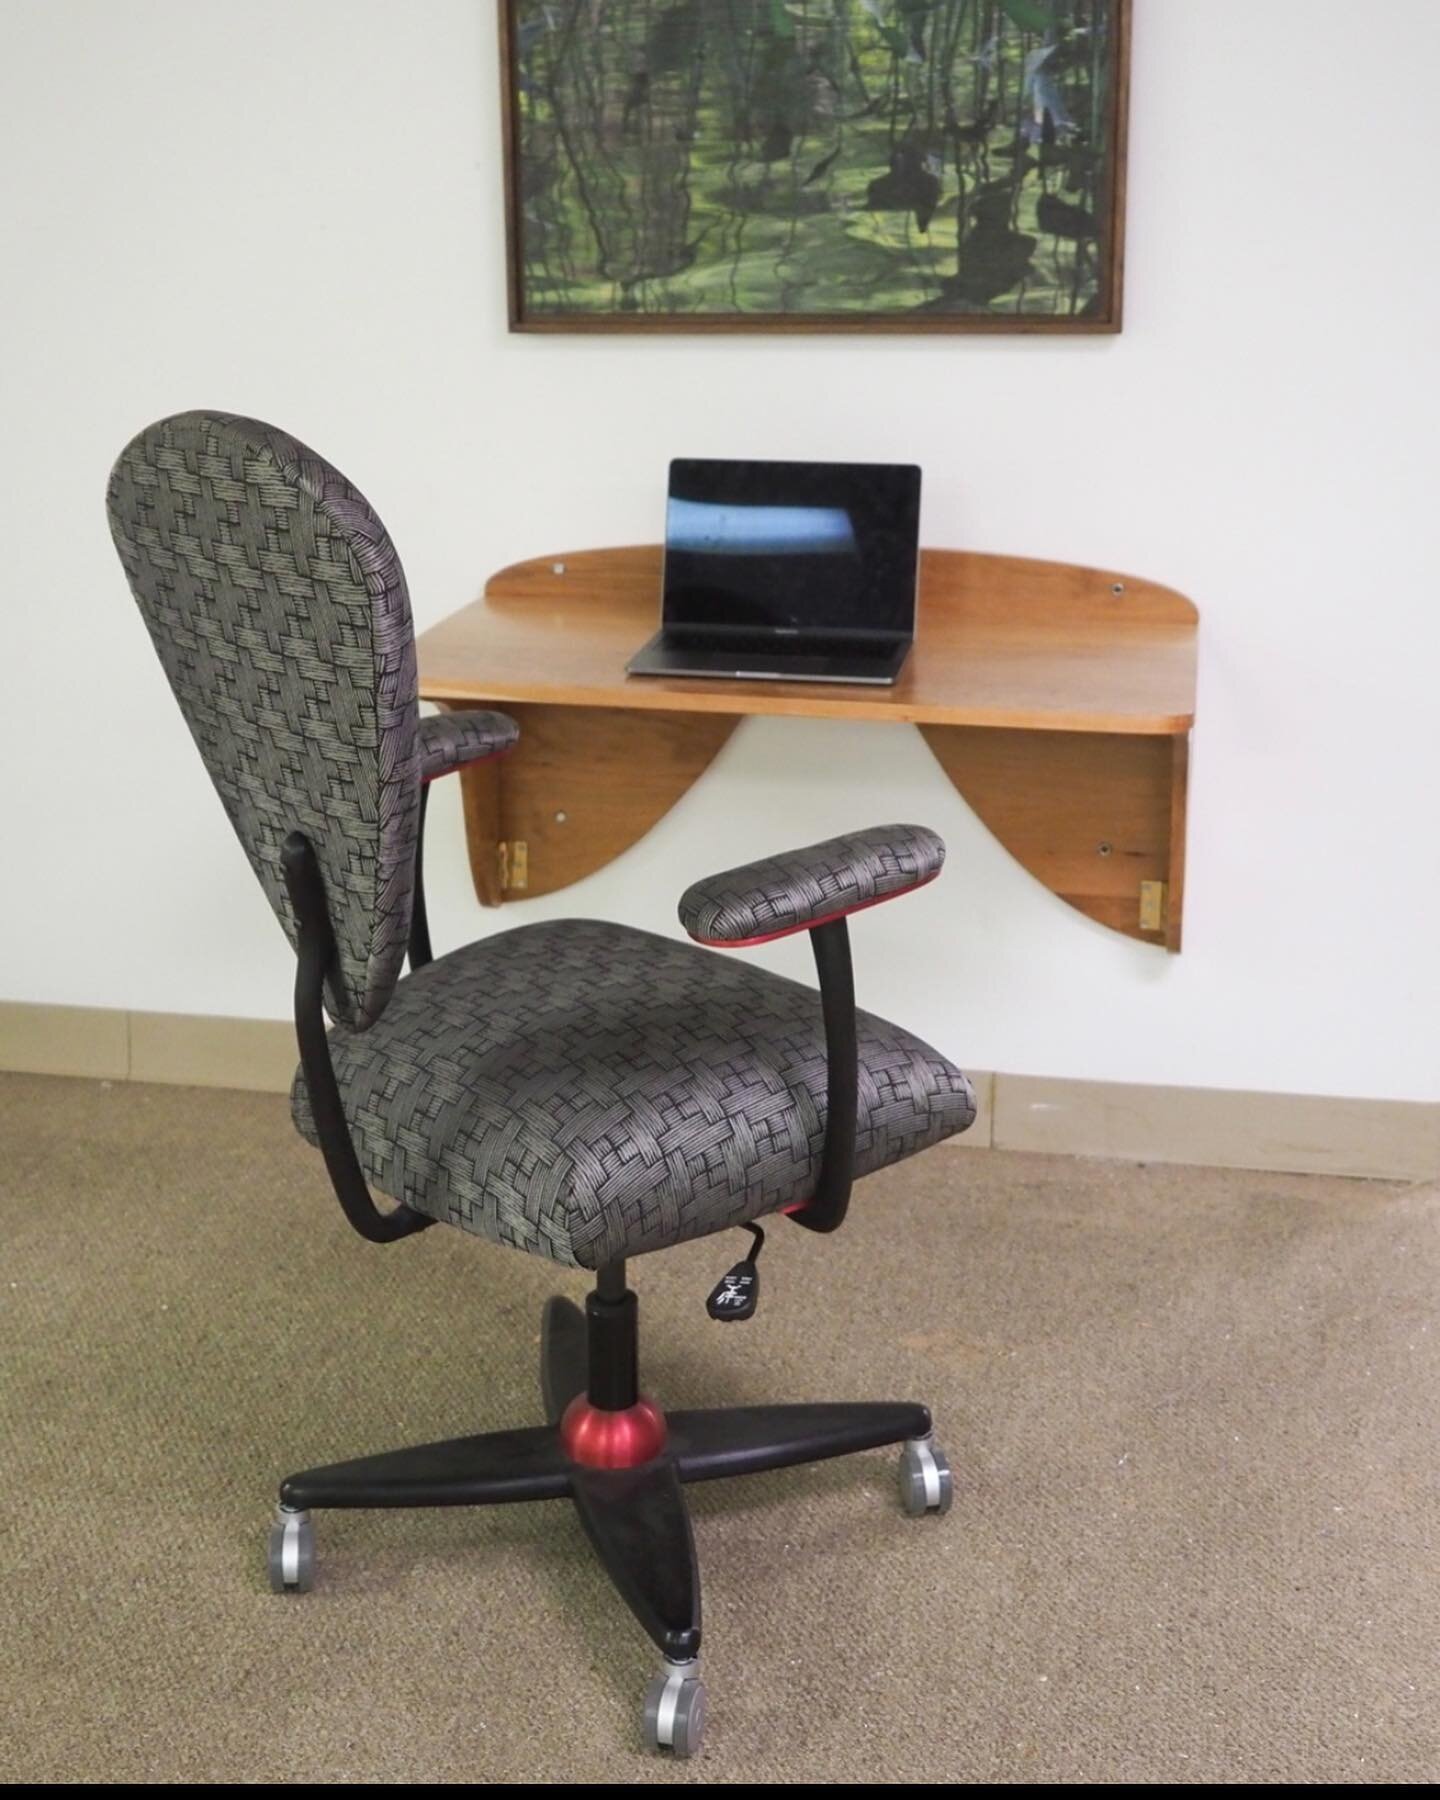 Folding Desks in the time of corona

...

As we continue our progression through the Covid pandemic, with so many of us working at home, space becomes an issue.  And, with the end of the pandemic in sight, it is likely that working at home will becom